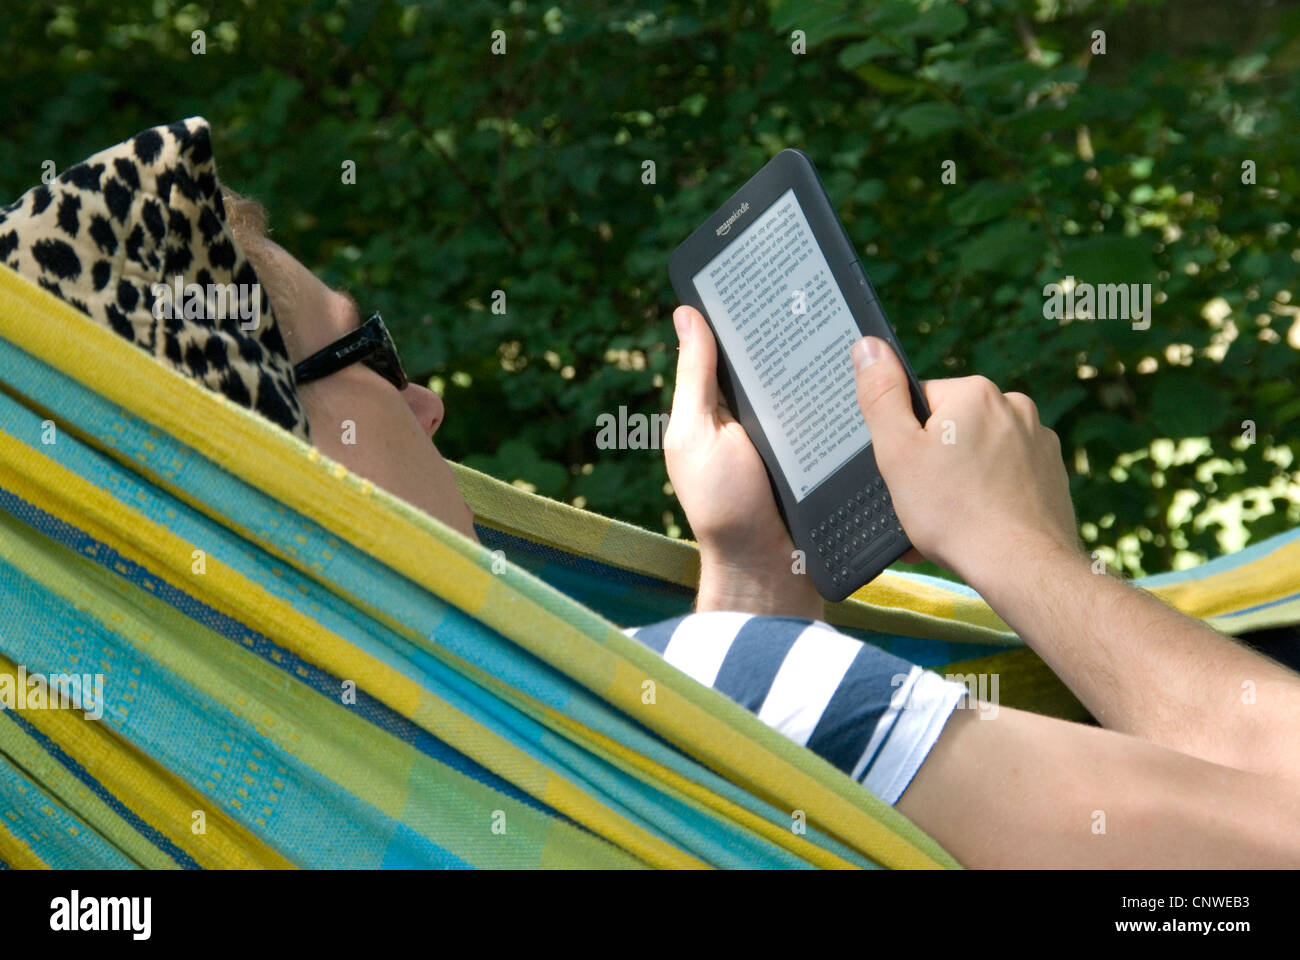 Young man reading Amazon Kindle lying in a hammock outdoors in the garden Luke Hanna MR Stock Photo